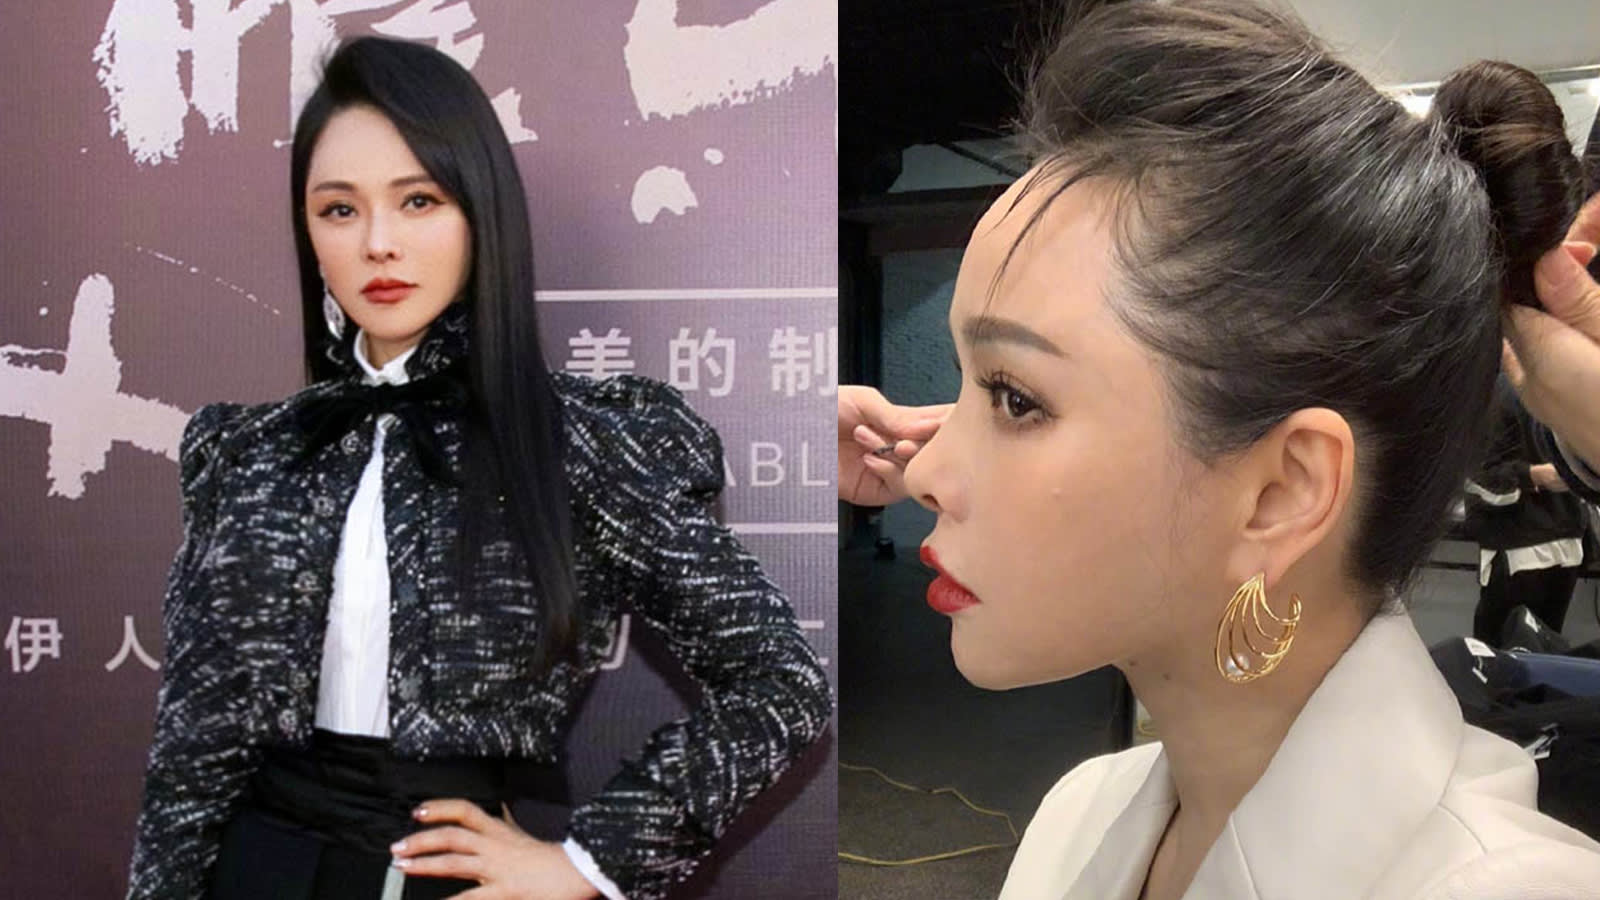 This Is How Annie Yi, 52, Reacted To A Netizen Who Pointed Out That She Has White Hair